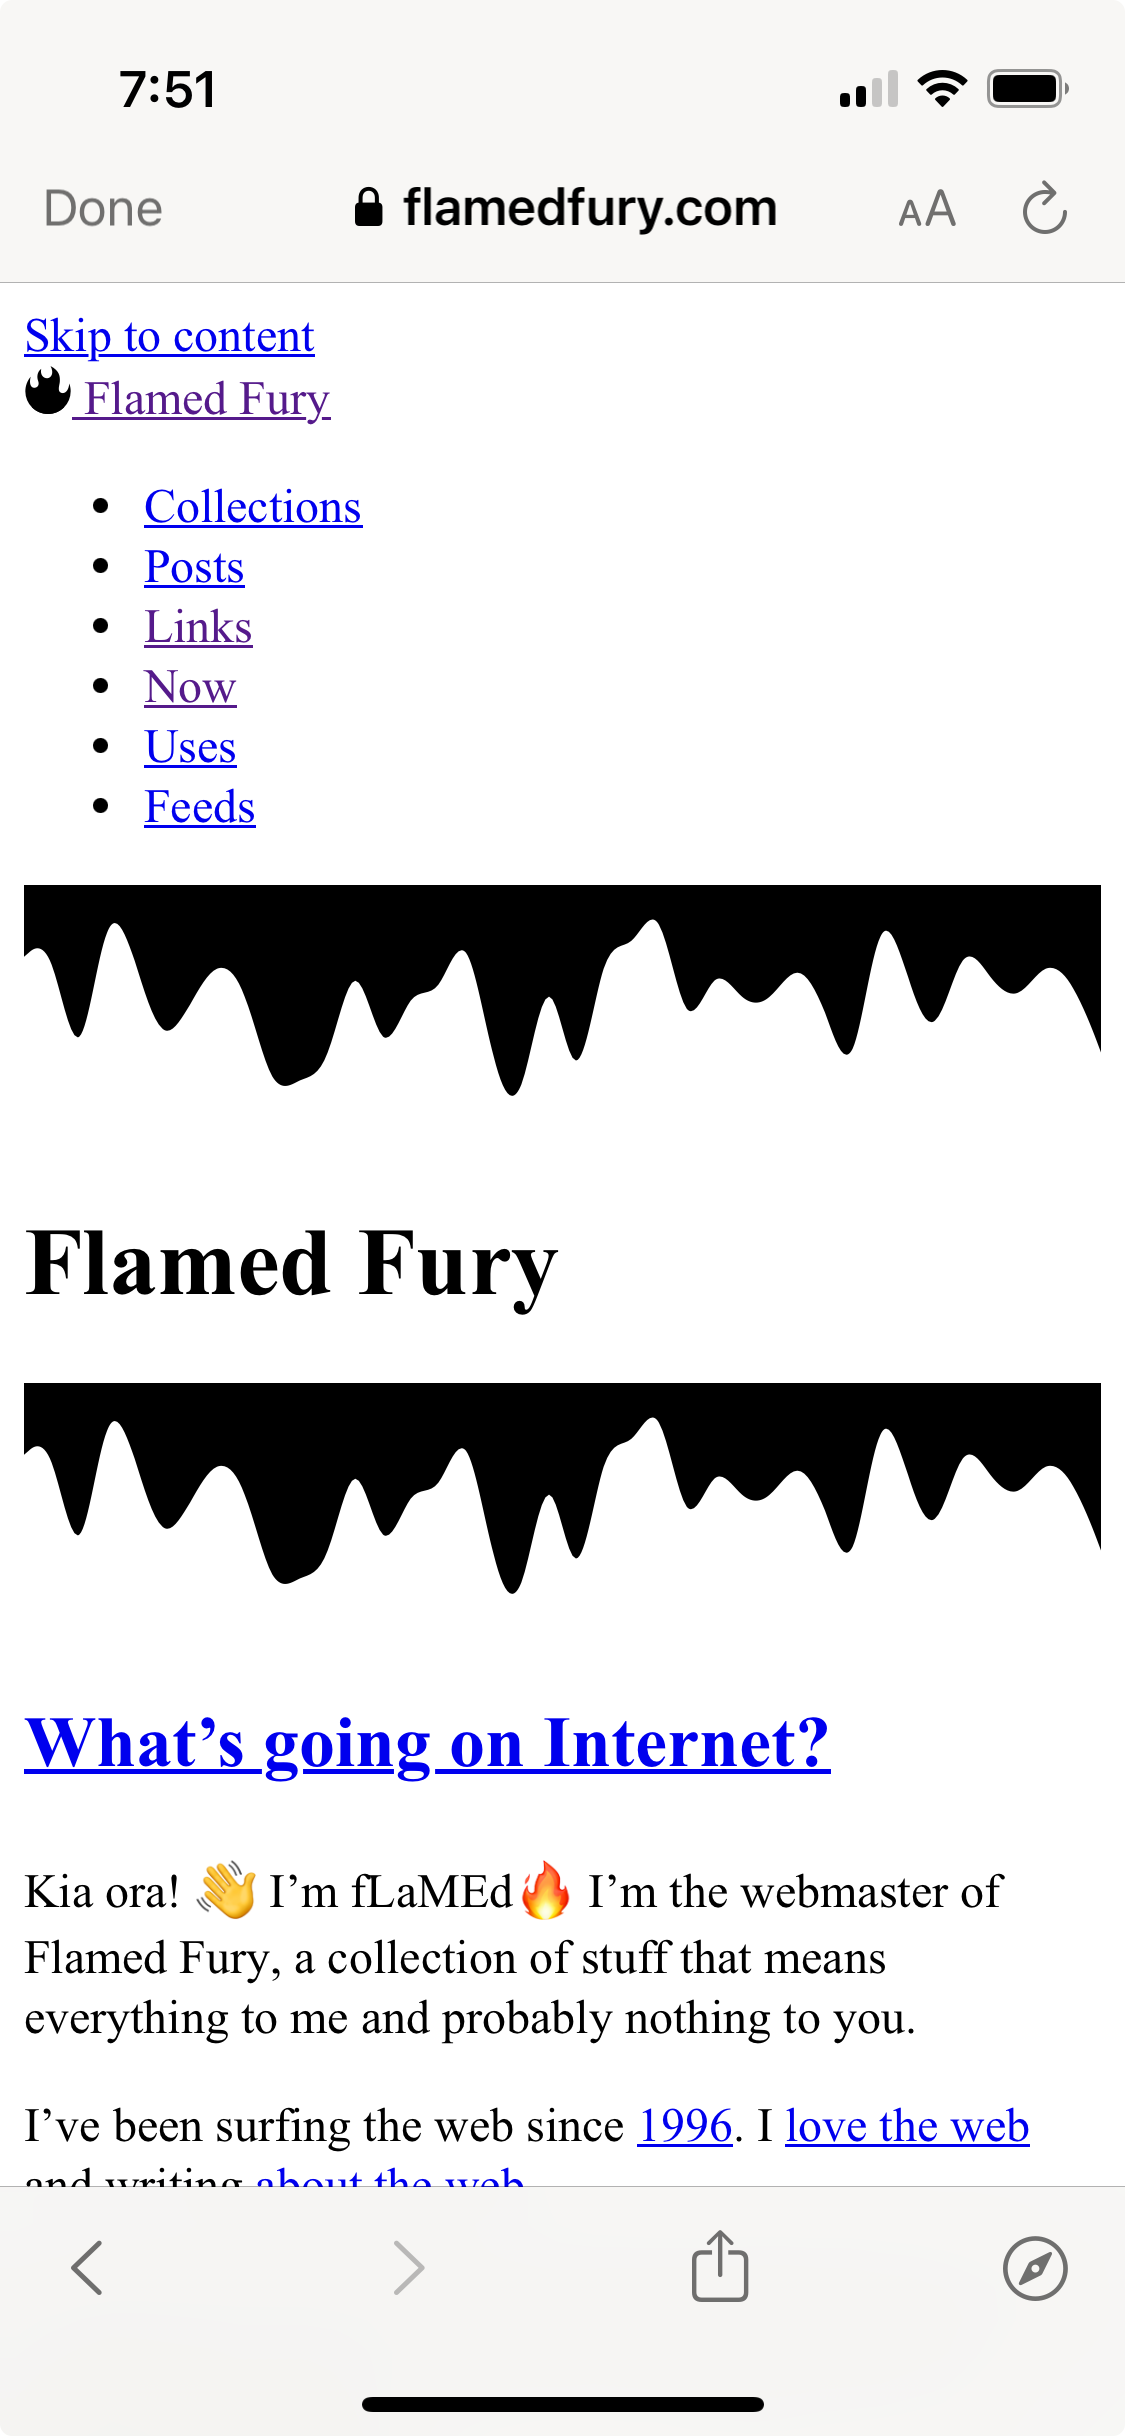 A mobile screen displays a website with a black-and-white wavy header. Blue text reads “What's going on Internet?” Below, a greeting “Kia ora!” introduces the site's webmaster and outlines his web activities since 1996.